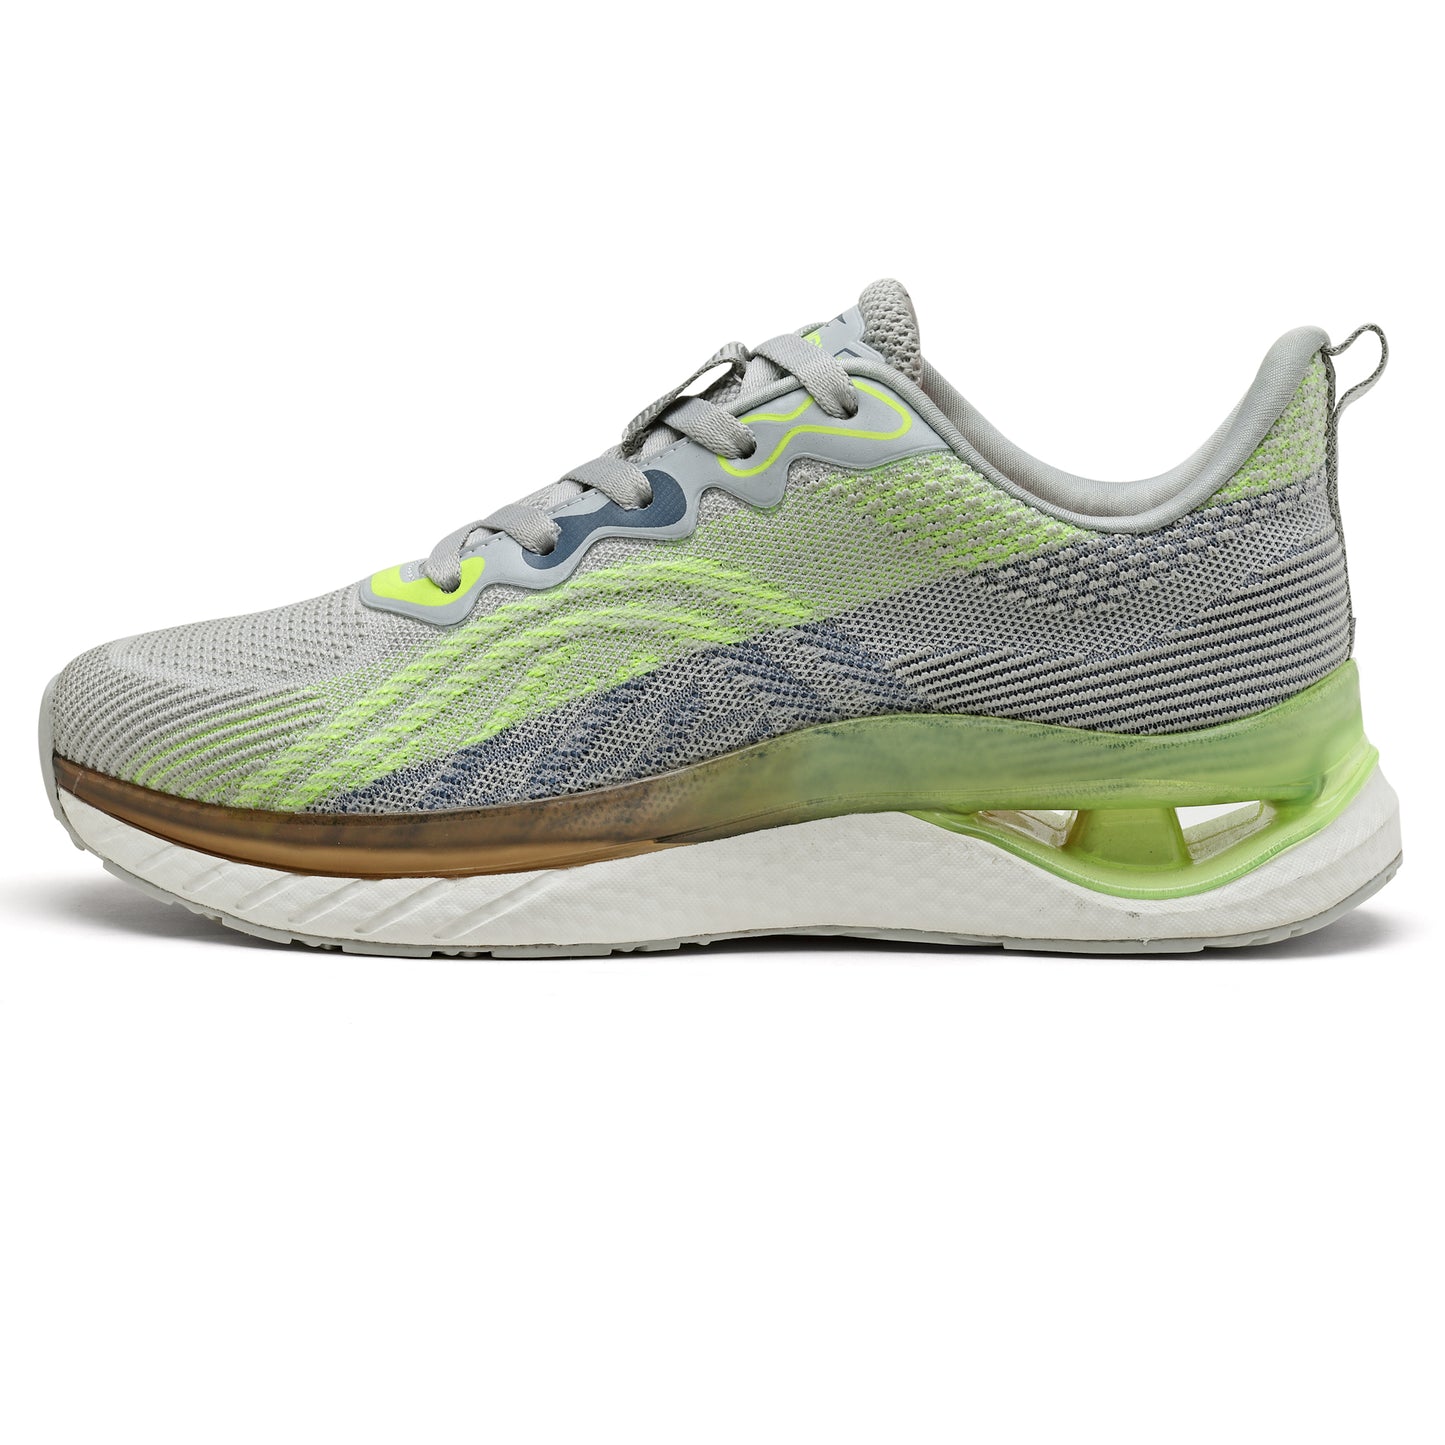 Vomax Sports Stalino-01 Flynit Breathable Upper Running Shoes for Men